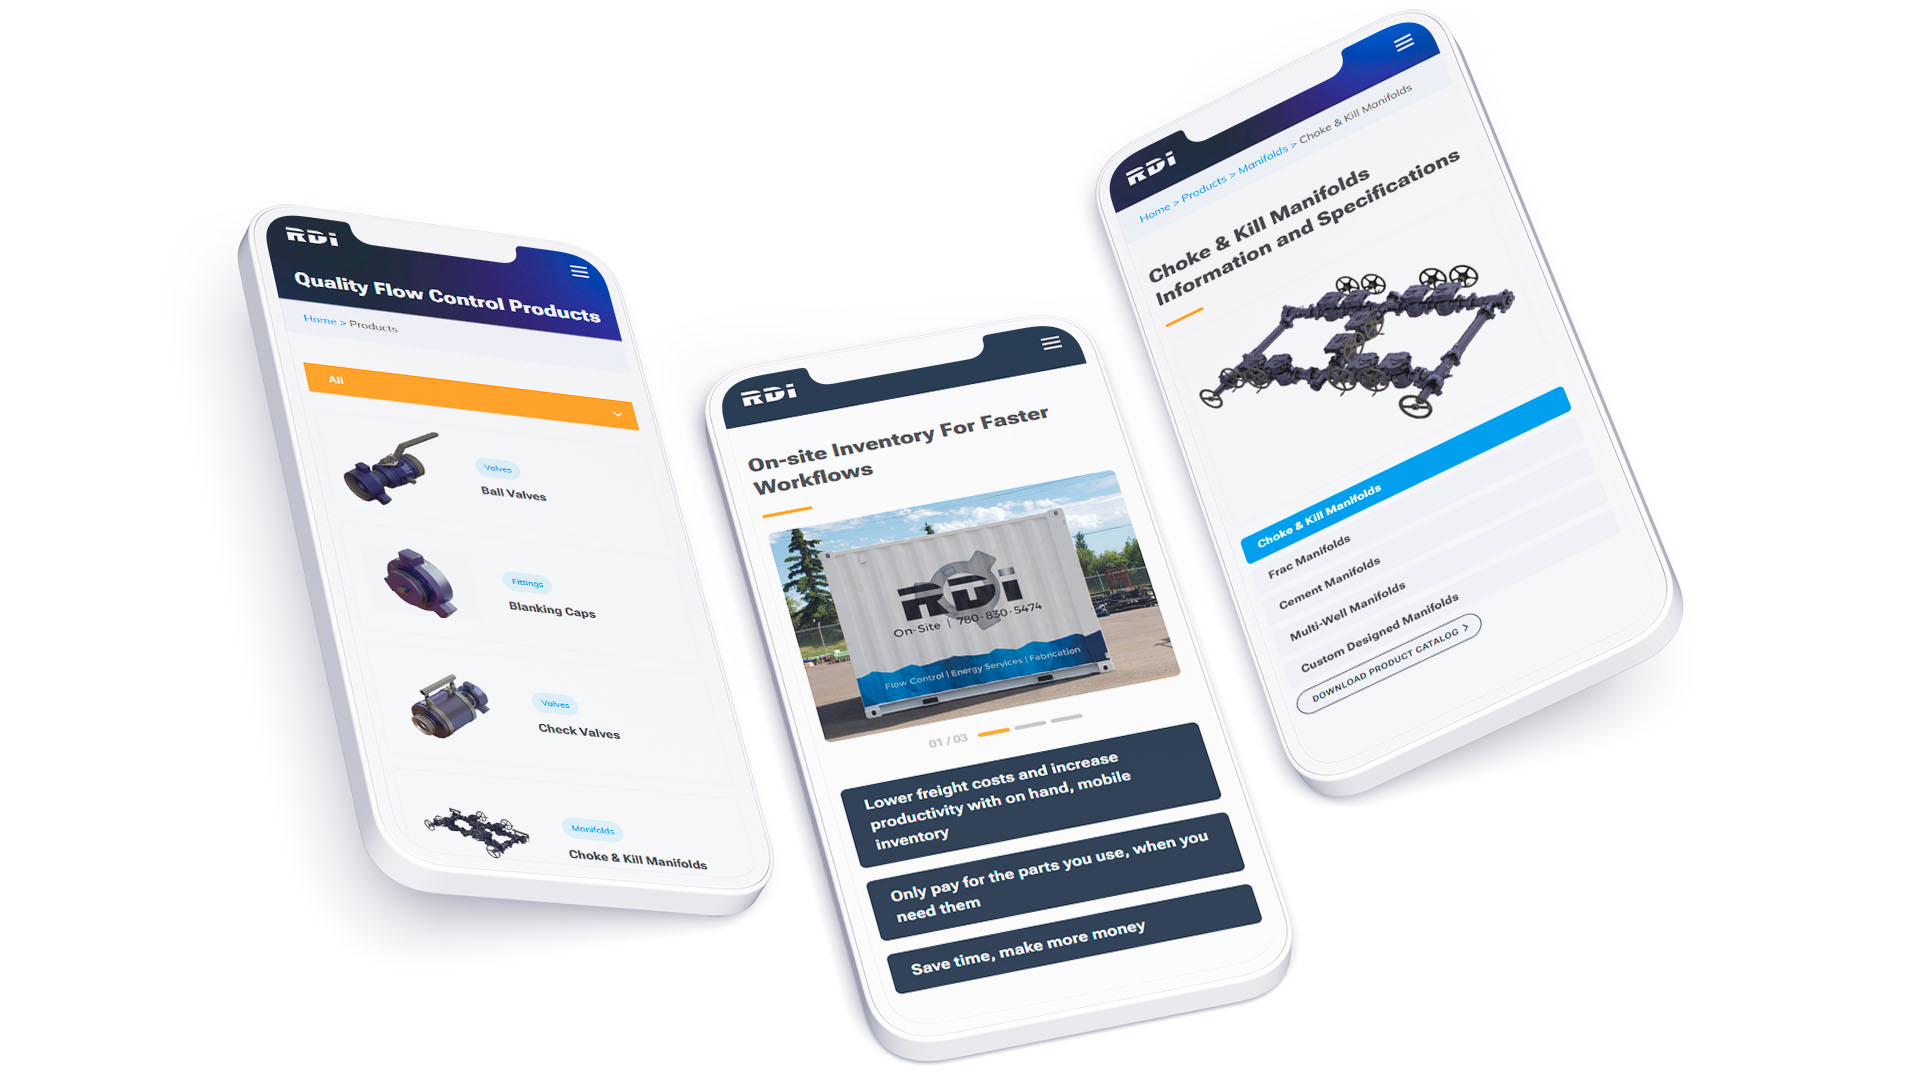 Mobile view of RDI website showcasing flow control products including ball valves, blanking caps, check valves, and choke & kill manifolds, highlighting on-site inventory and downloadable product catalog for efficient workflow optimization.